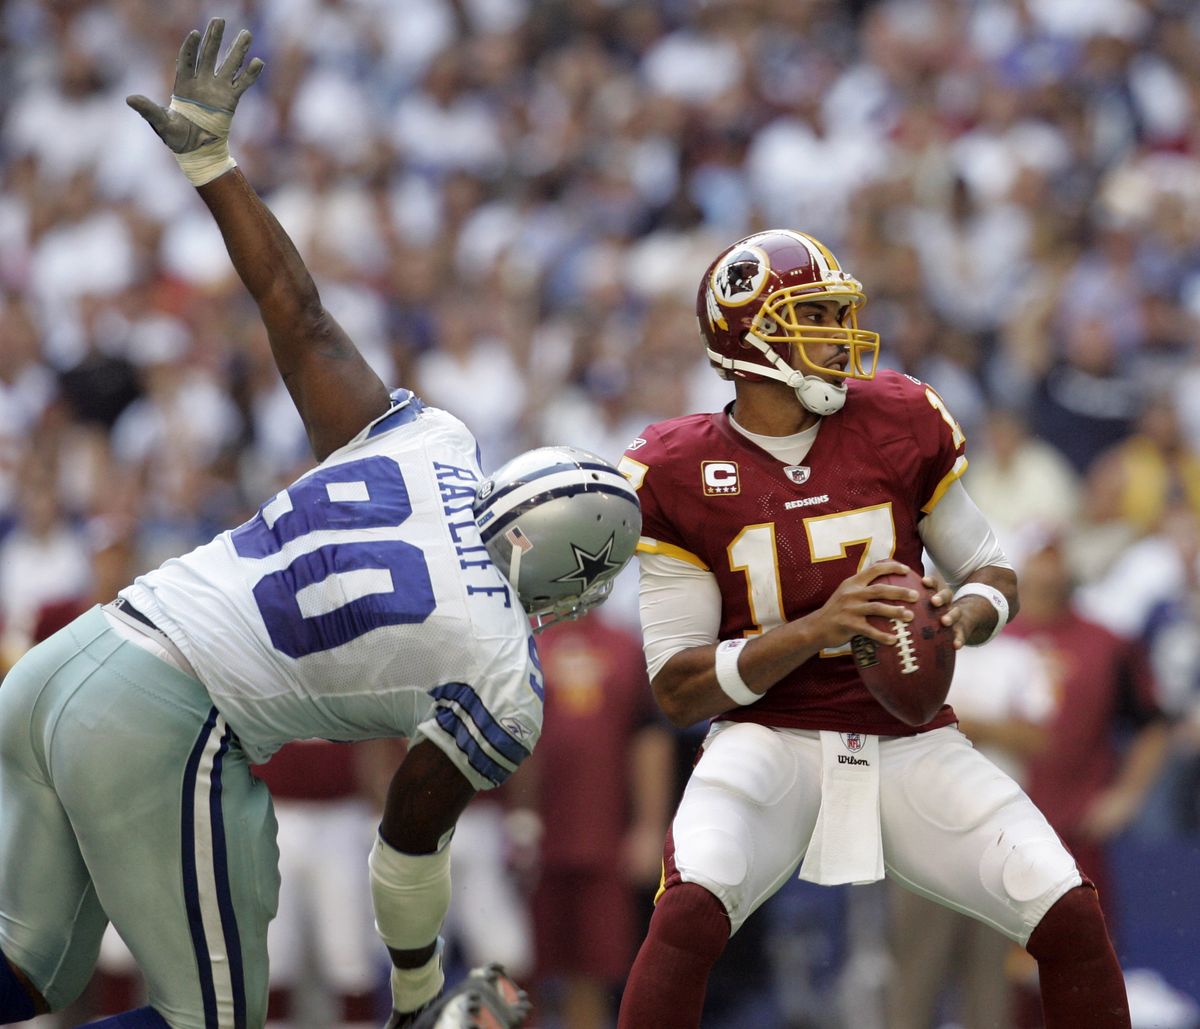 Redskins quarterback Jason Campbell throws under pressure from Dallas’ Jay Ratliff in the second quarter. (Associated Press / The Spokesman-Review)